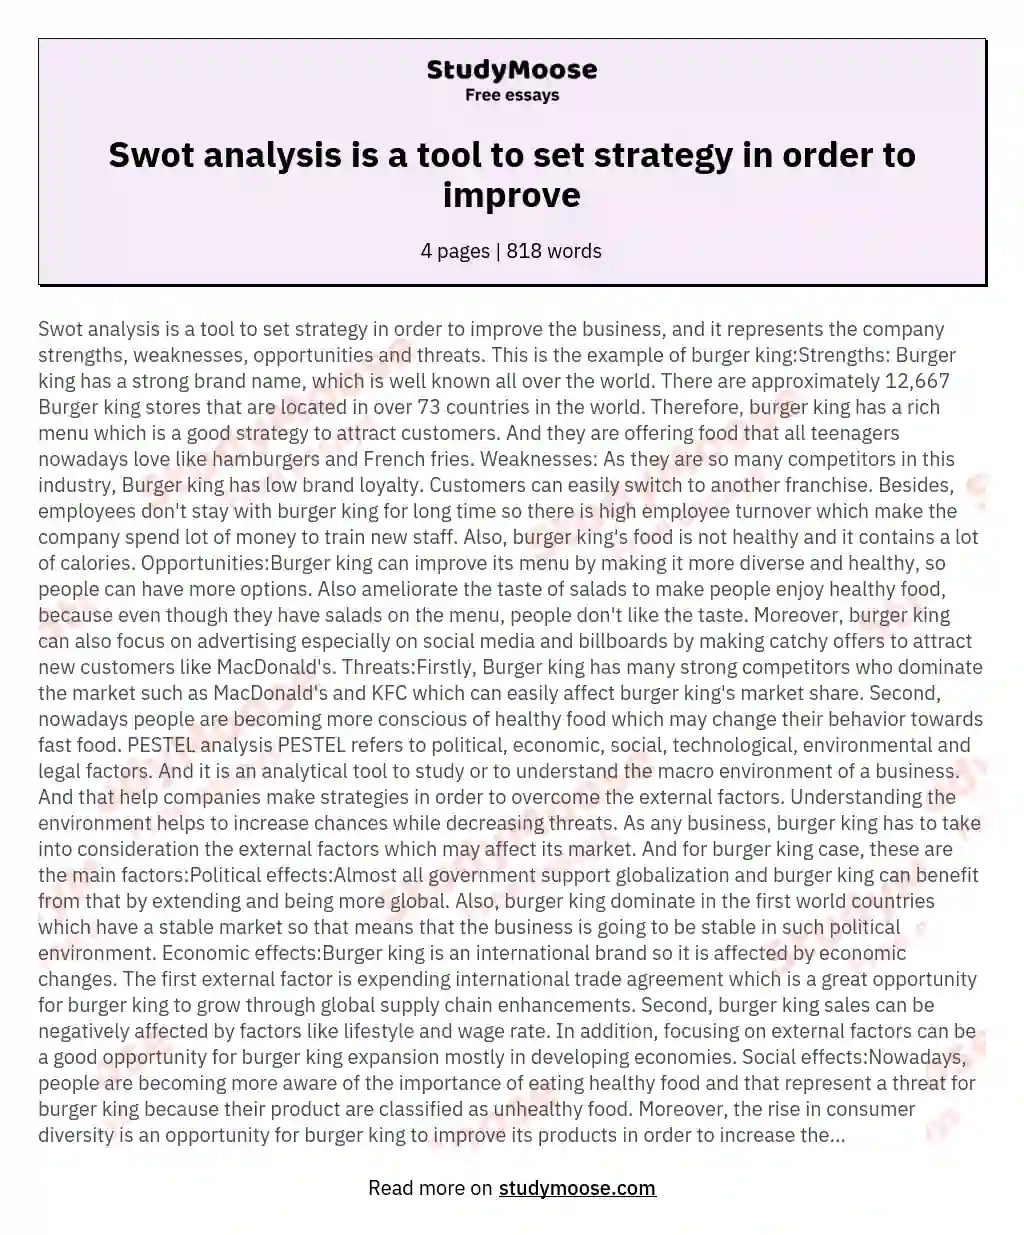 Swot analysis is a tool to set strategy in order to improve essay